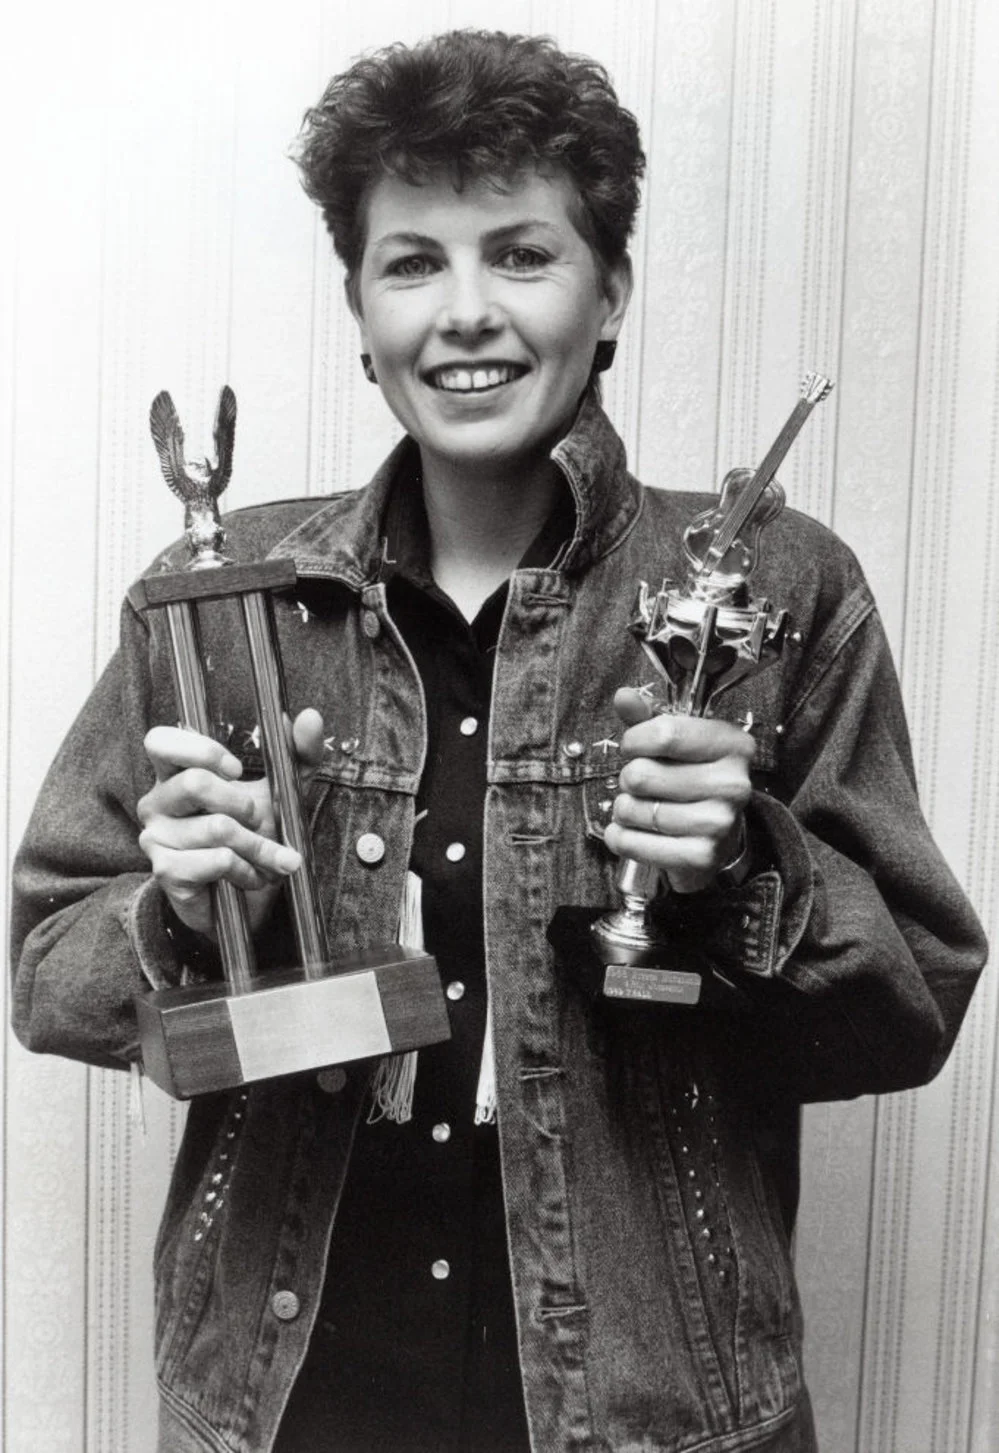 Brenda Anderson, 1990, country singer/songwriter, and song-writing trophies for her song "The Organist".